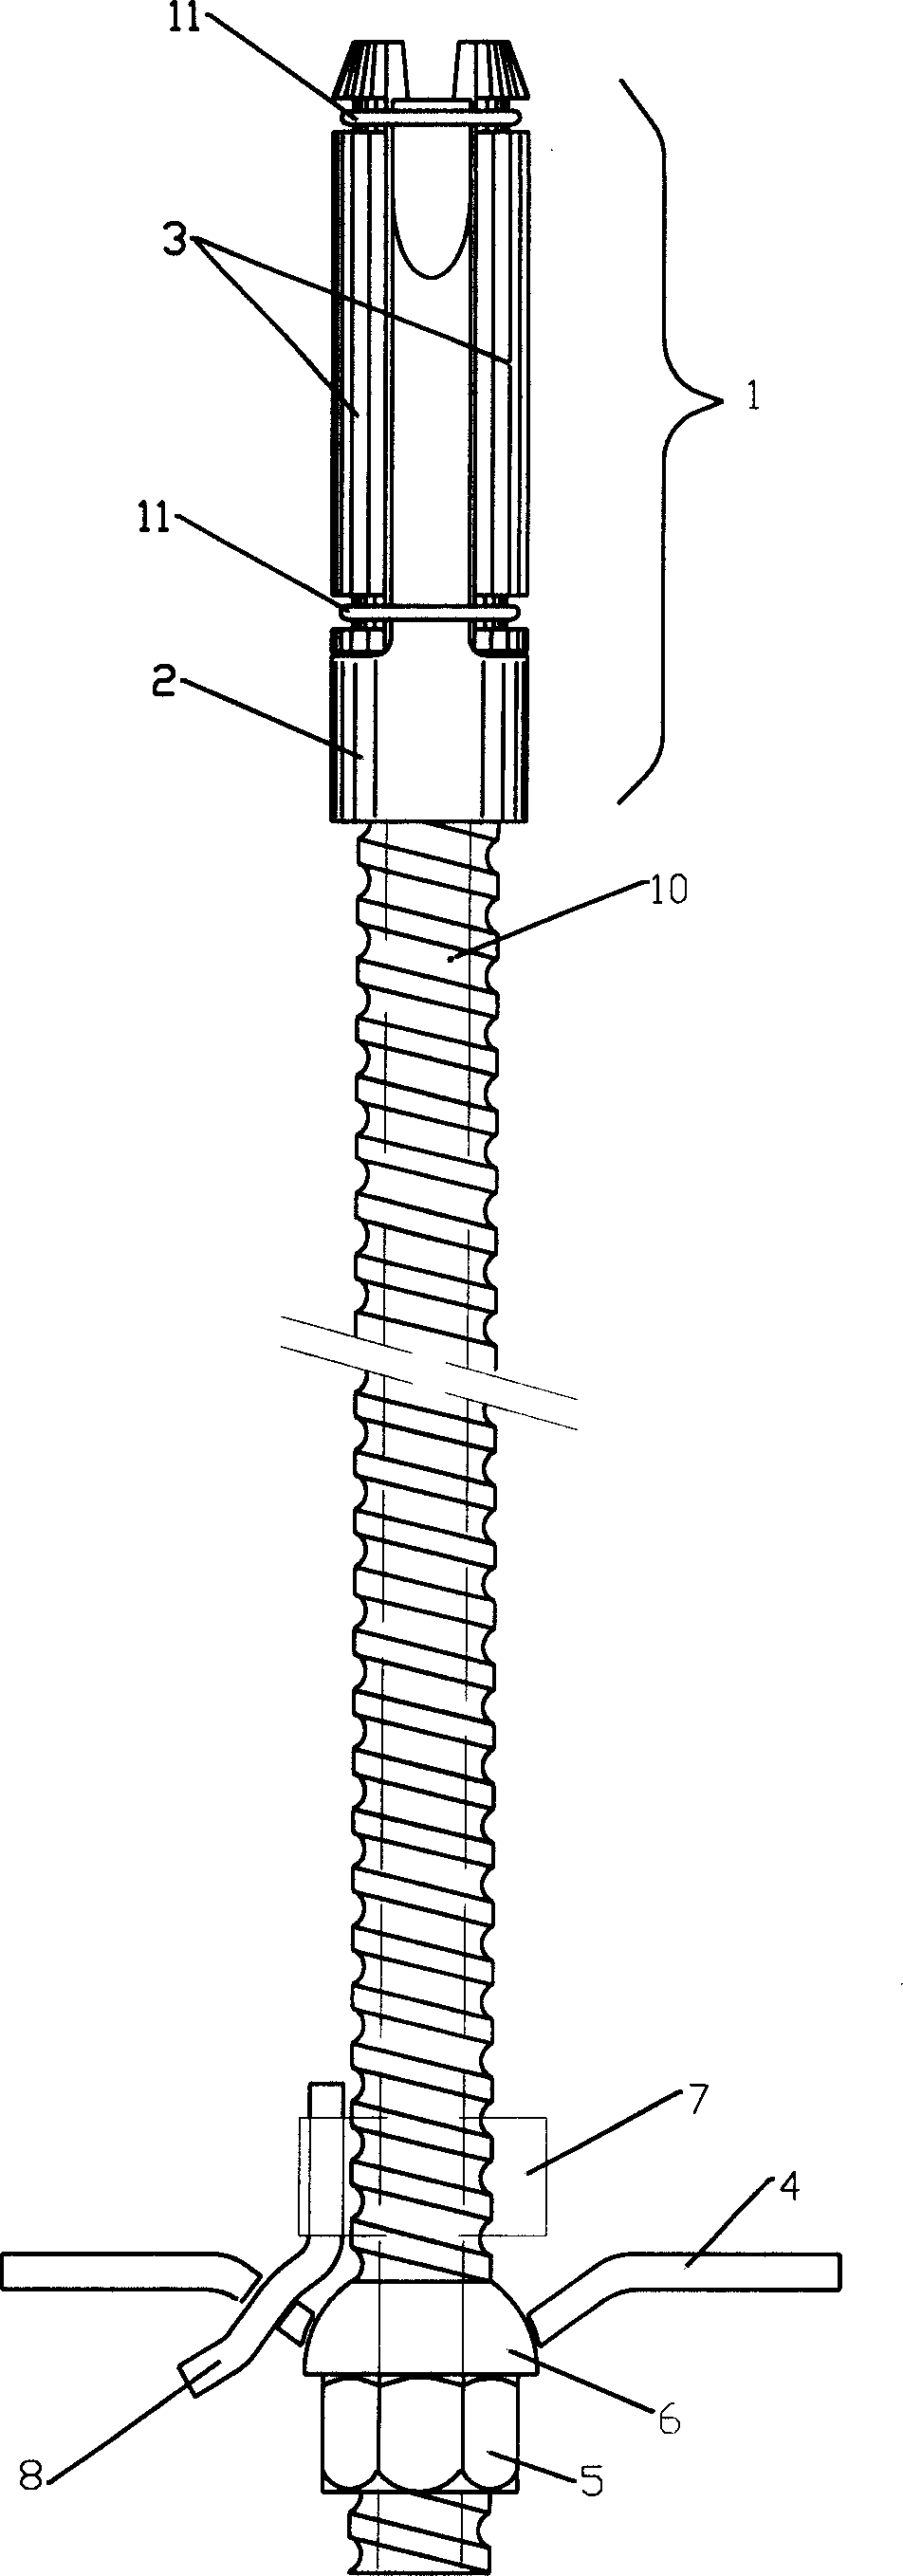 Shell expansion type rock bolt